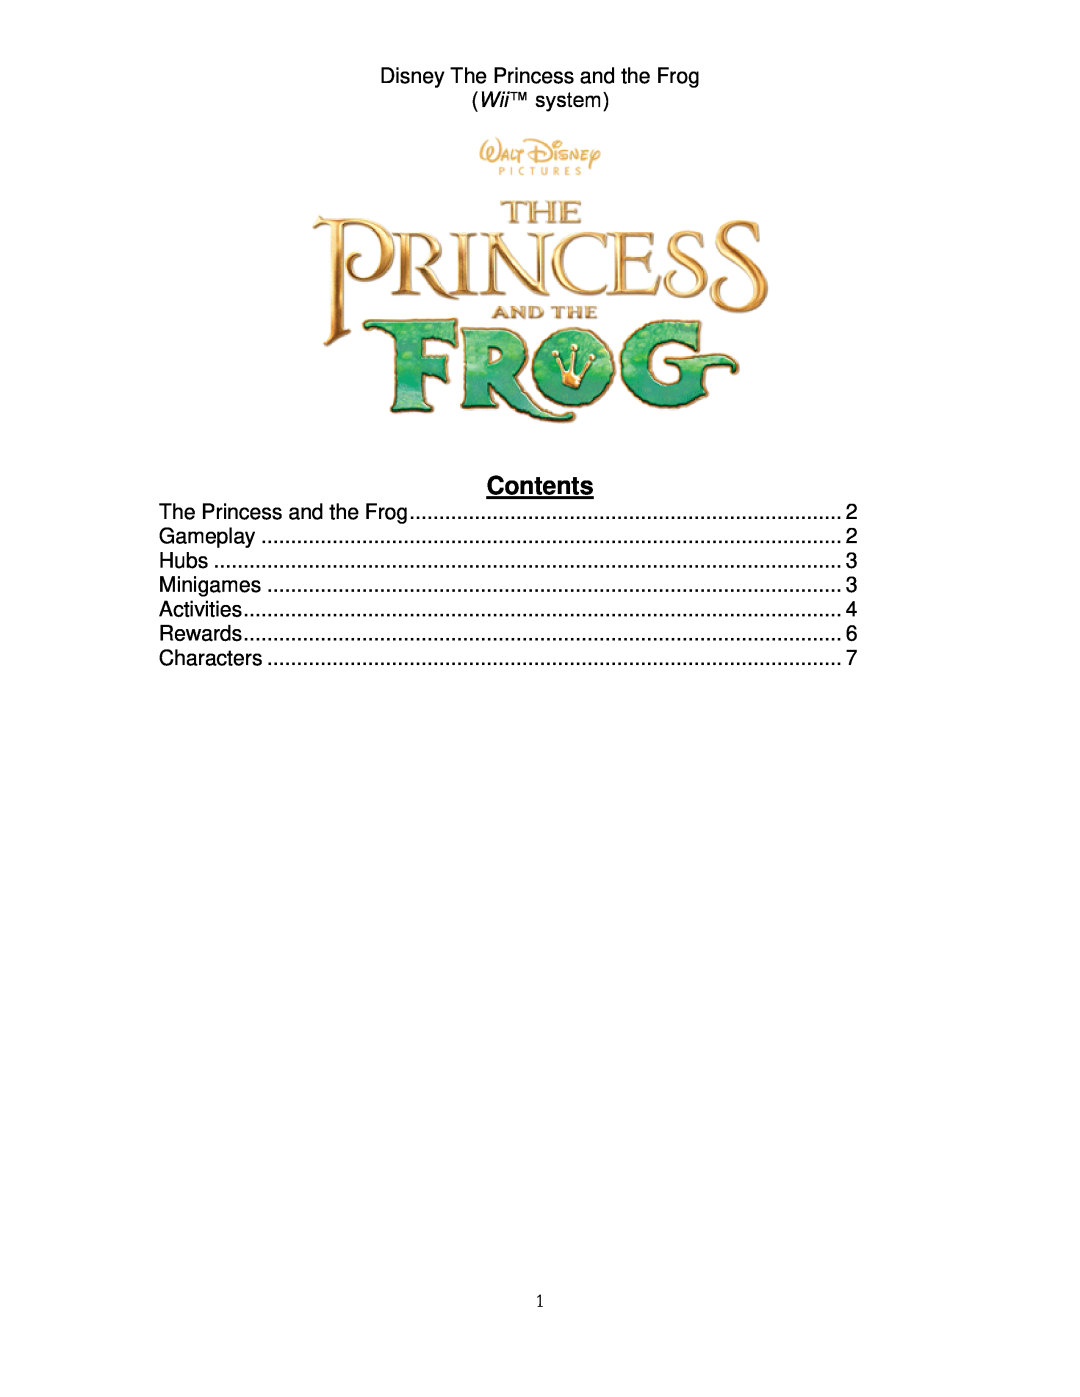 Disney Interactive Studios The Princess and the Frog for Wii manual Contents, Gameplay, Hubs, Minigames, Activities 